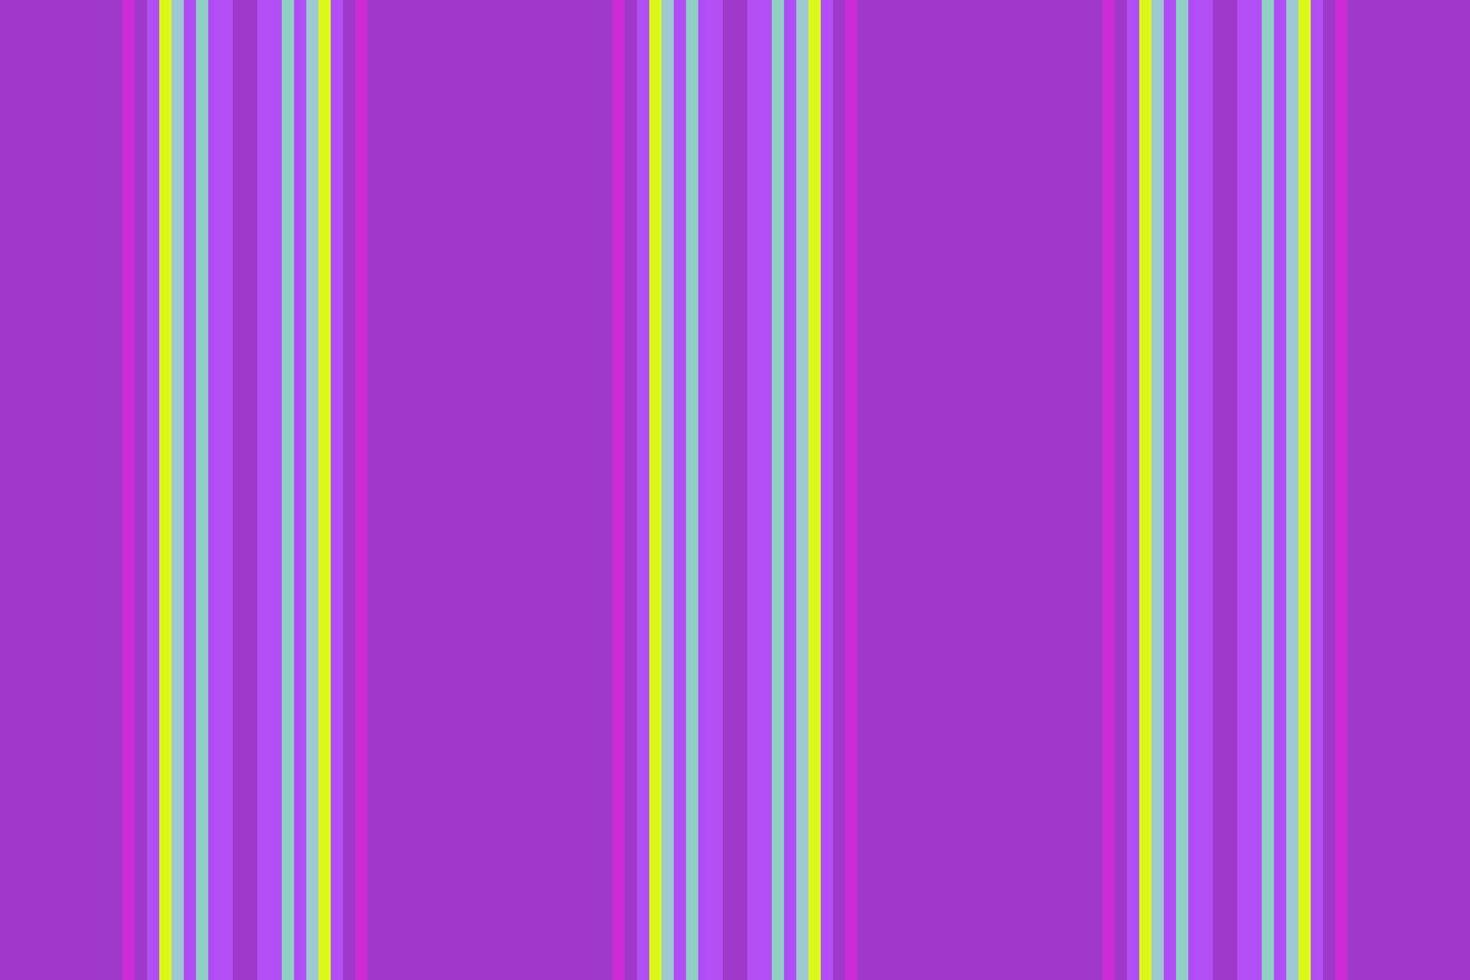 Stripe vector texture of lines vertical fabric with a textile seamless pattern background.